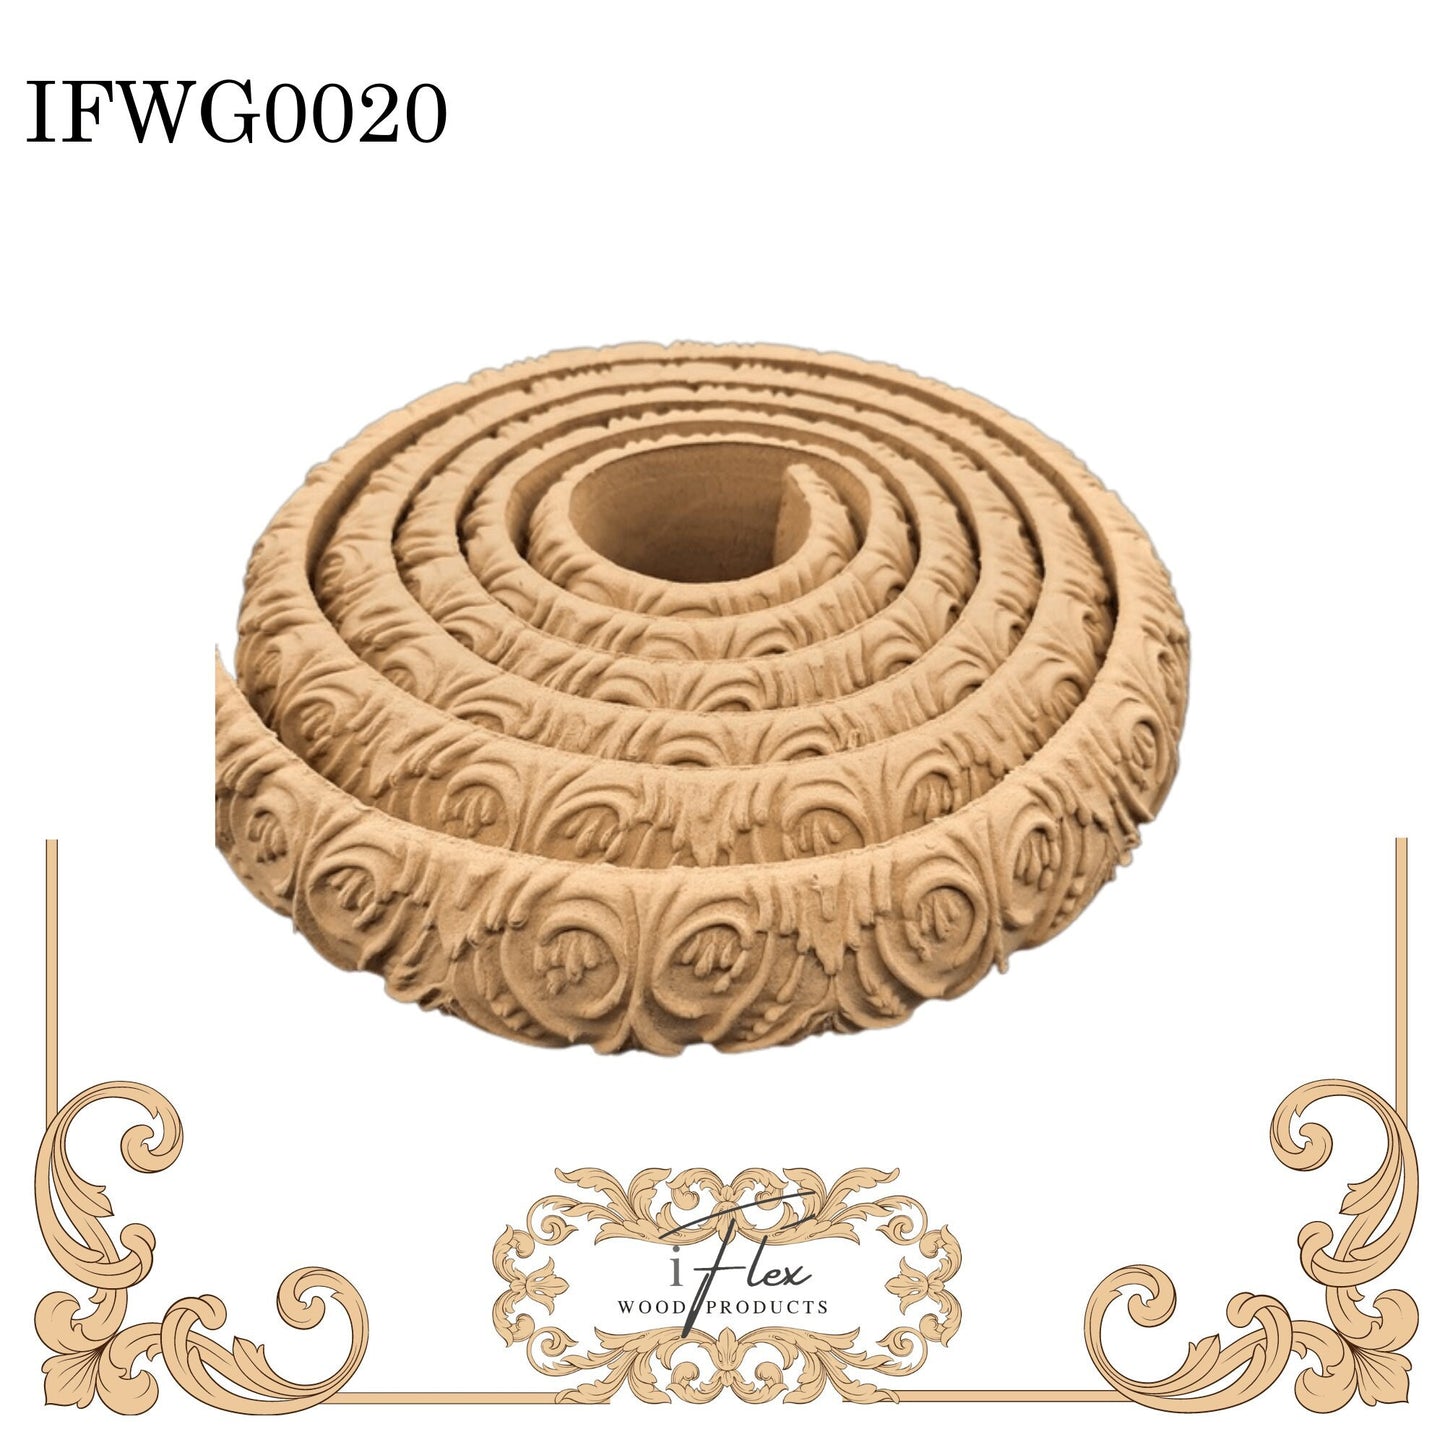 IFWG0020 iFlex Wood Products, bendable mouldings, flexible, wooden appliques, trim